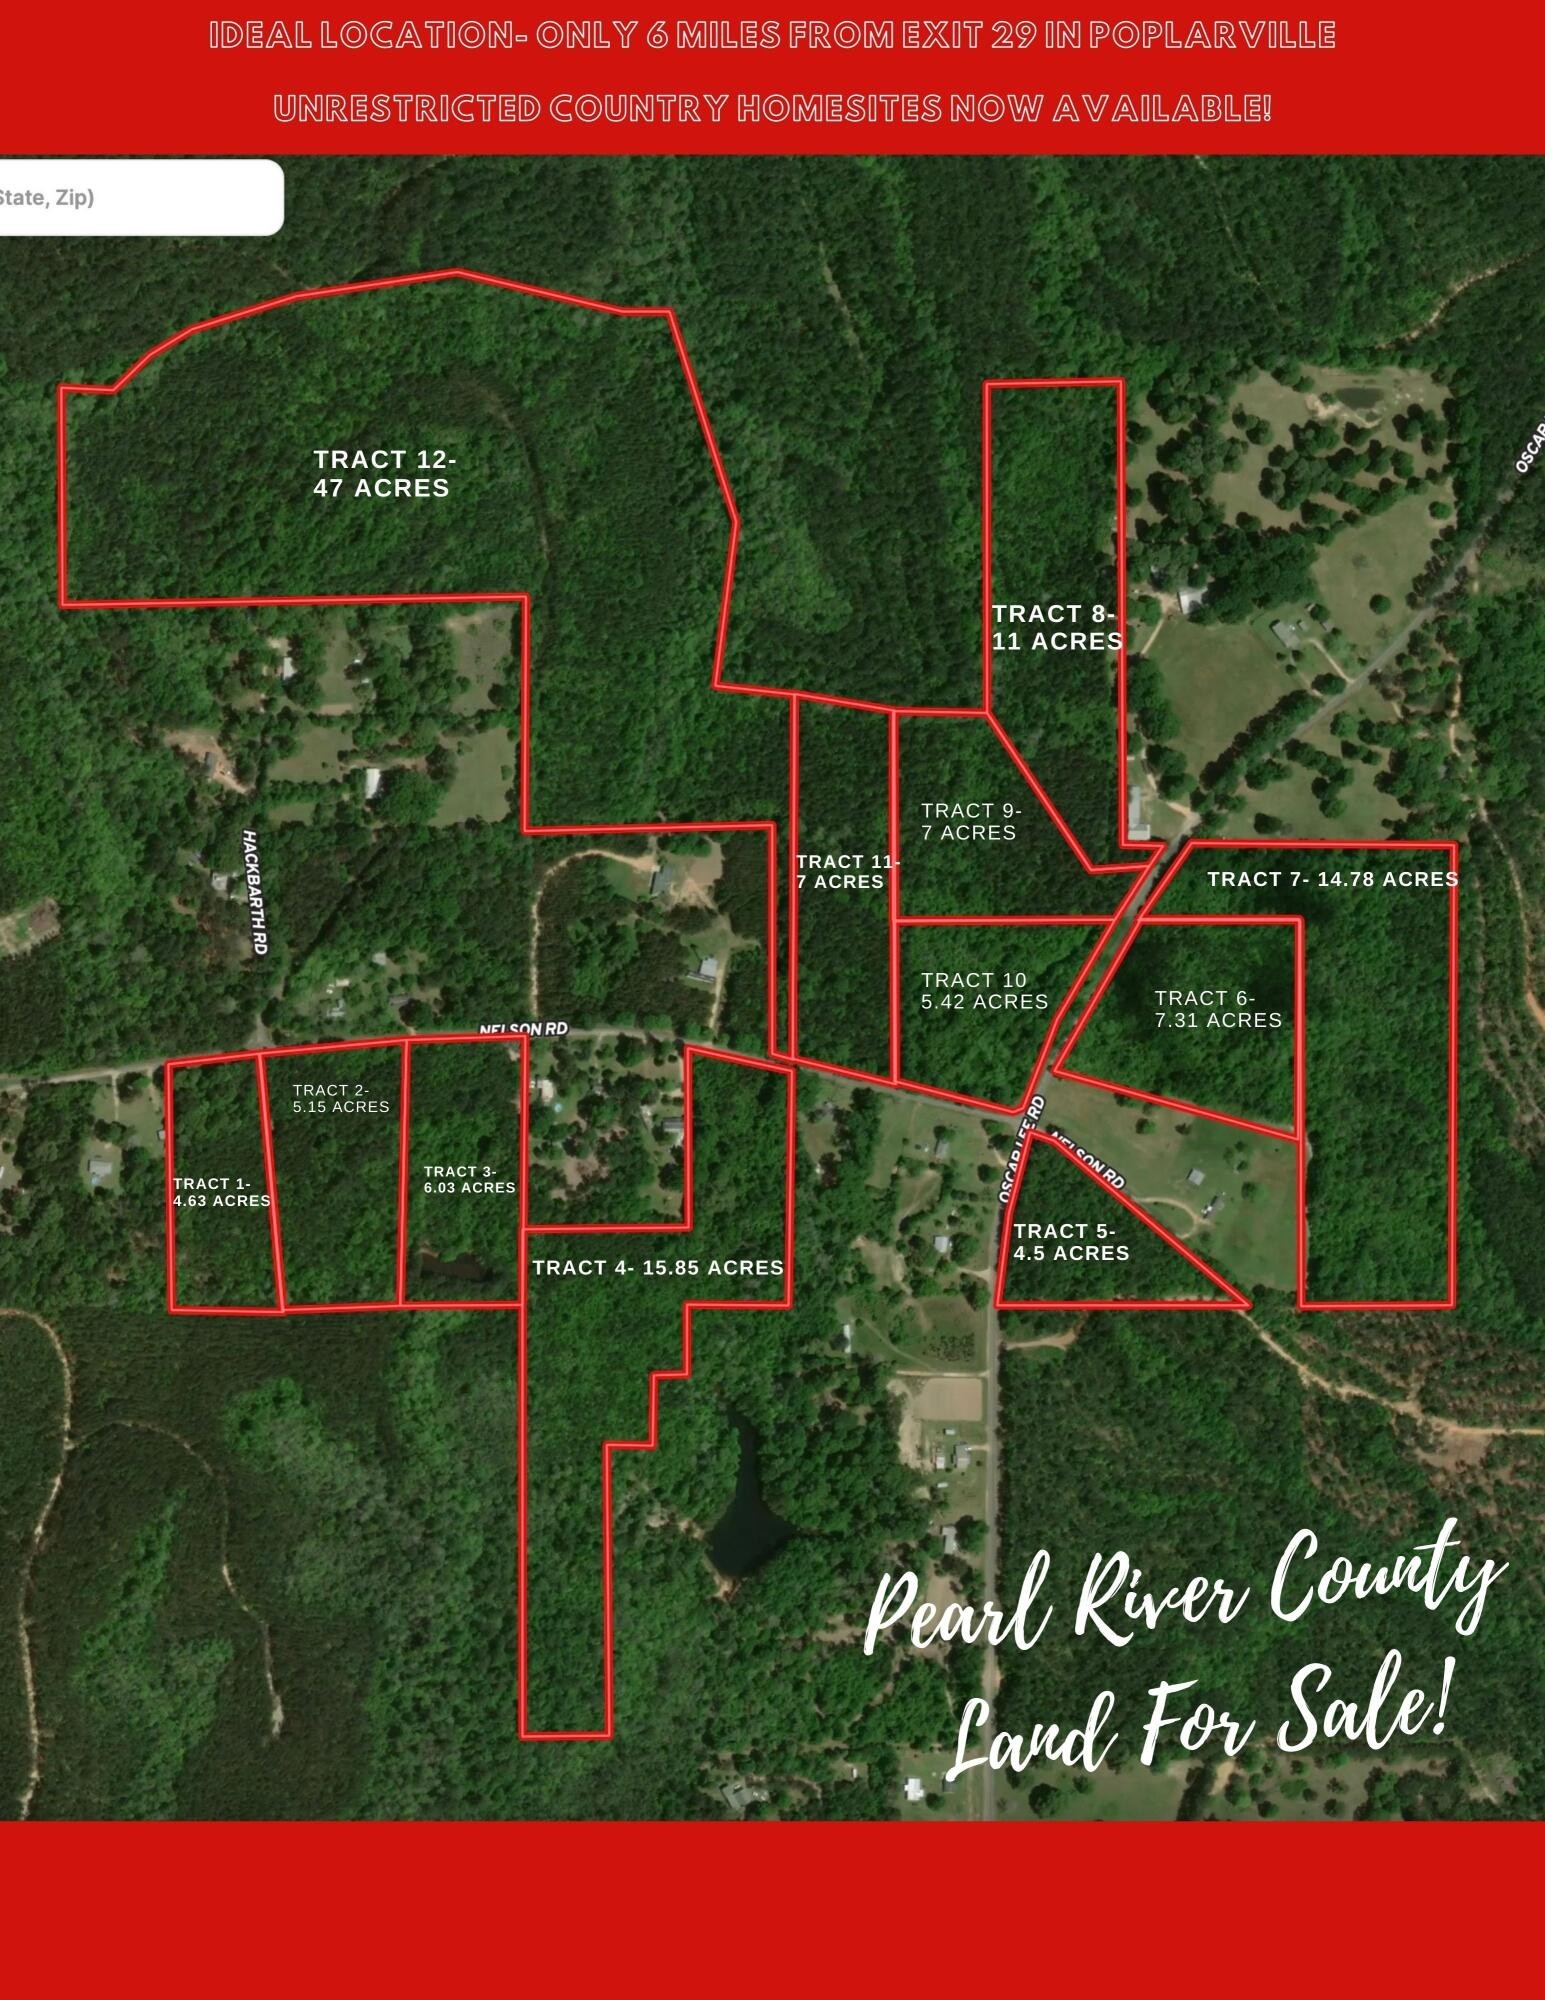 2. Tract 12 47 Acres Nelson Rd.